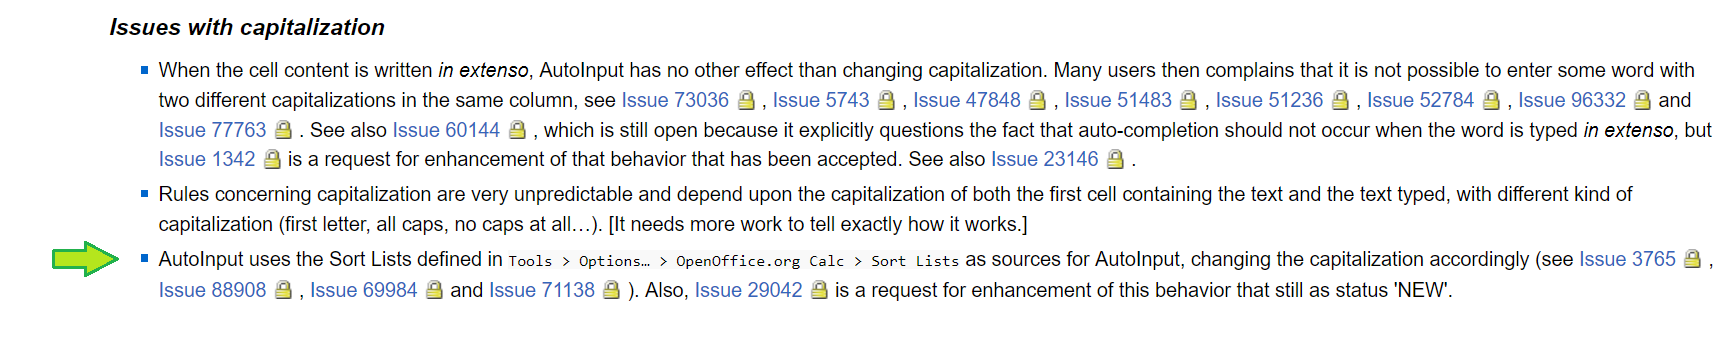 Wiki_AutoInput.png